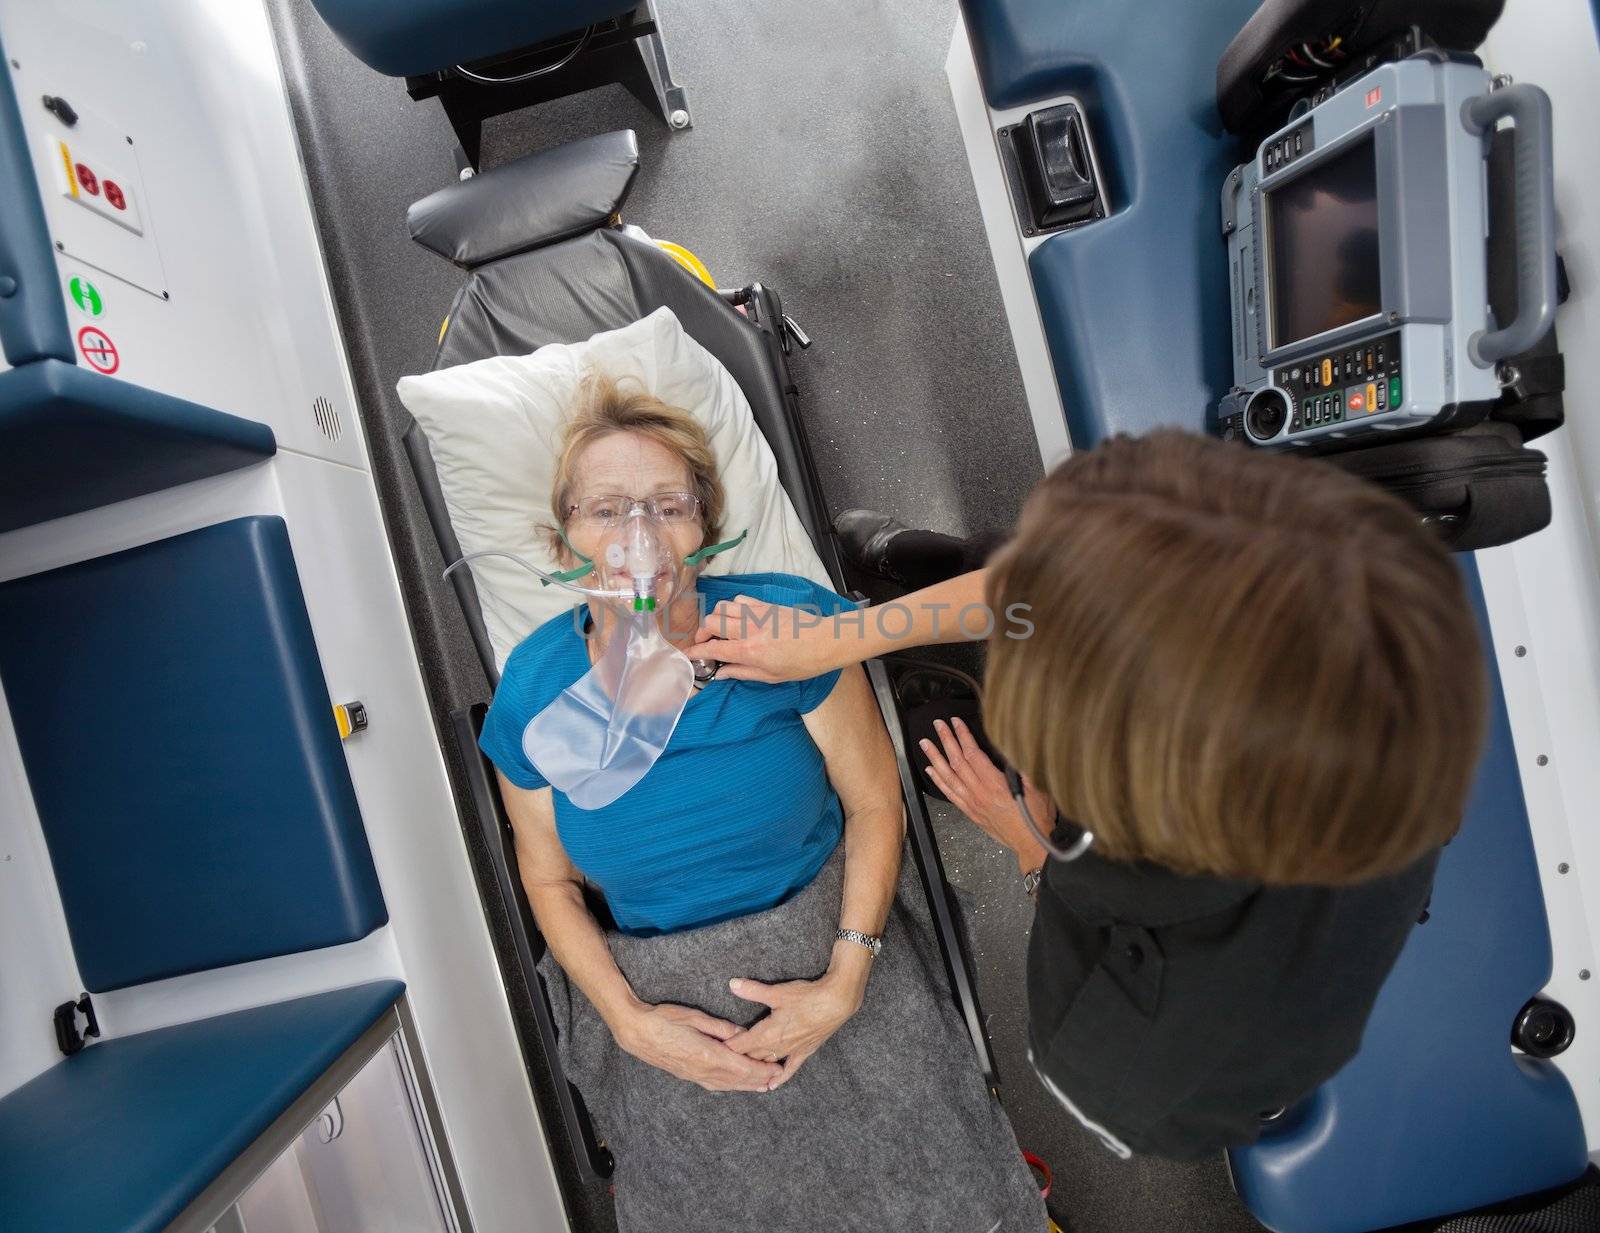 Overhead view of senior woman patient in ambulance receiving oxygen and having heart rate measured